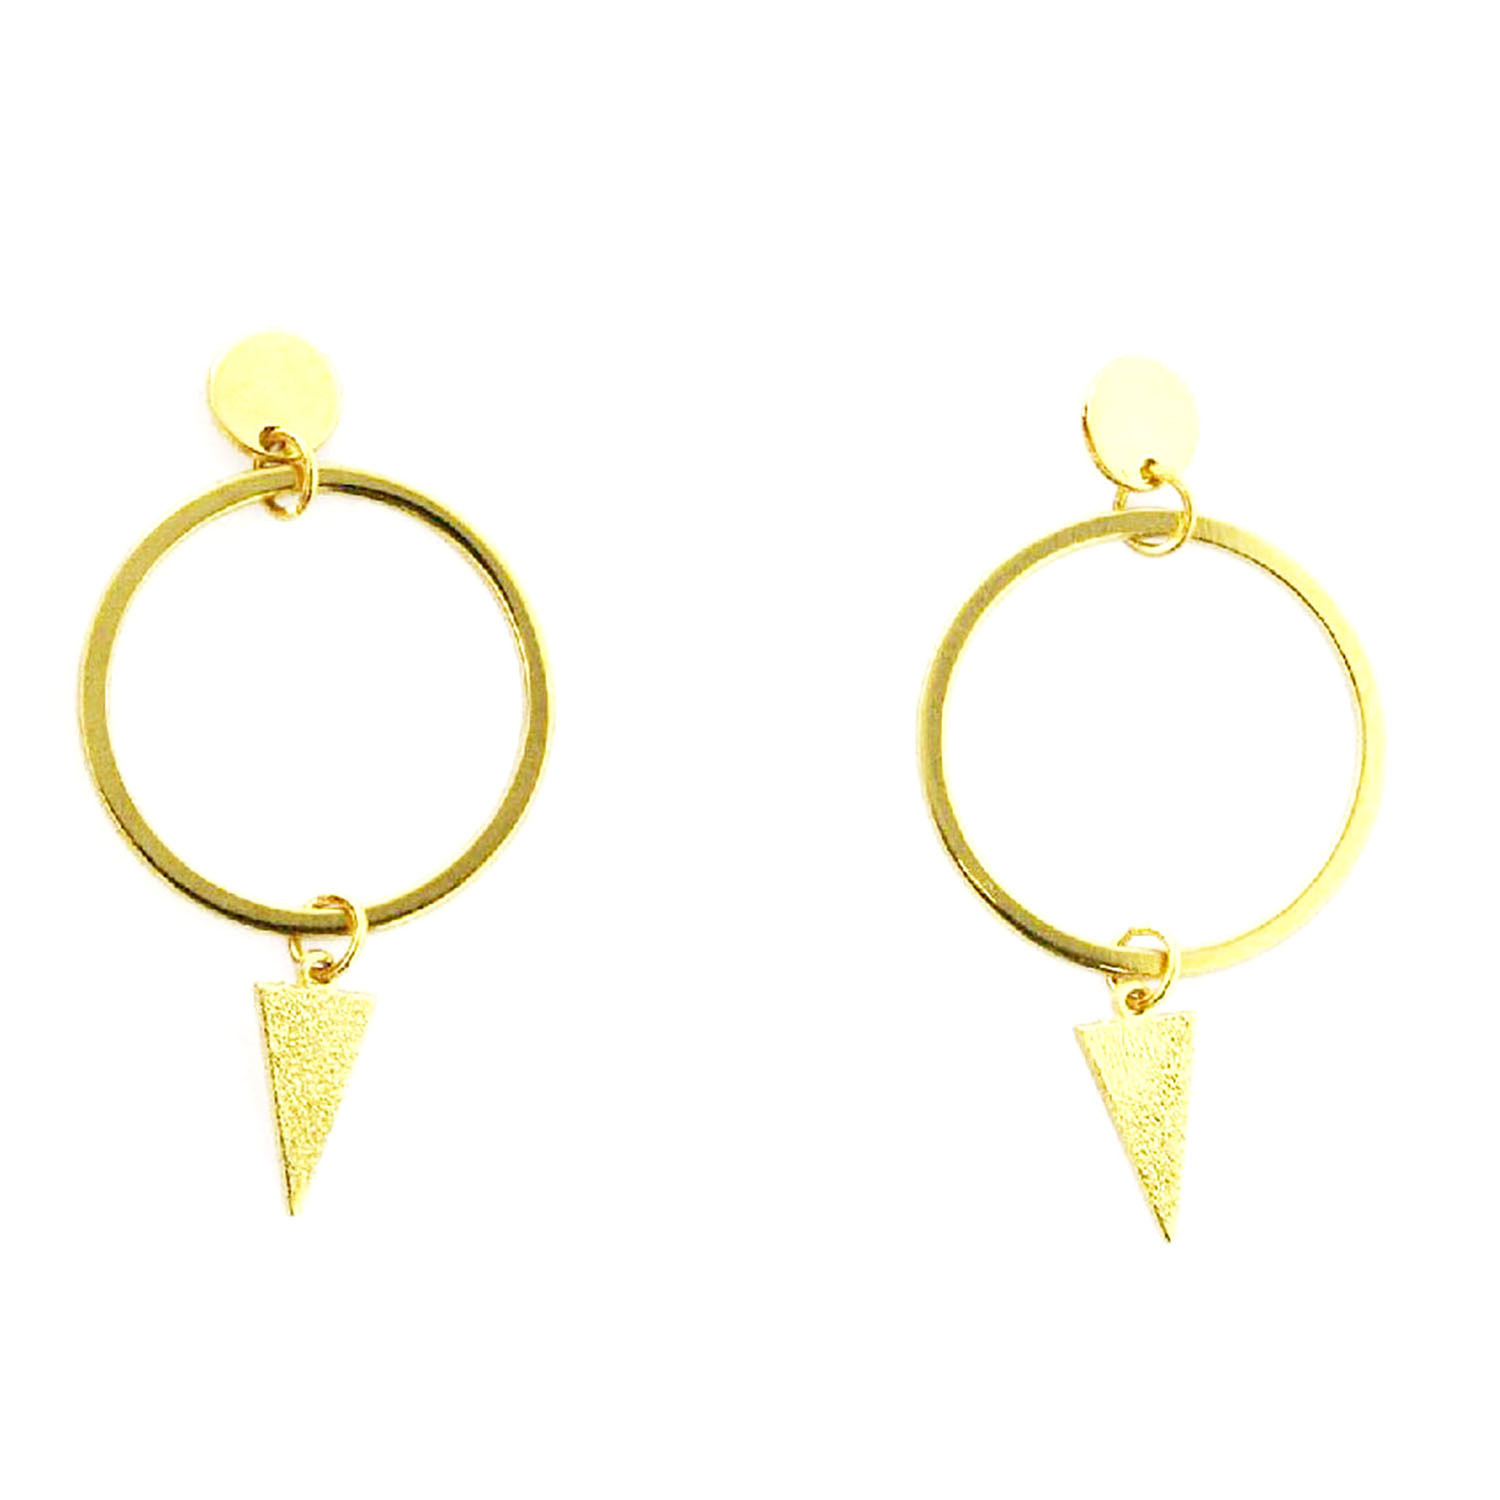 Boucles d'oreilles cercle pampille triangle or